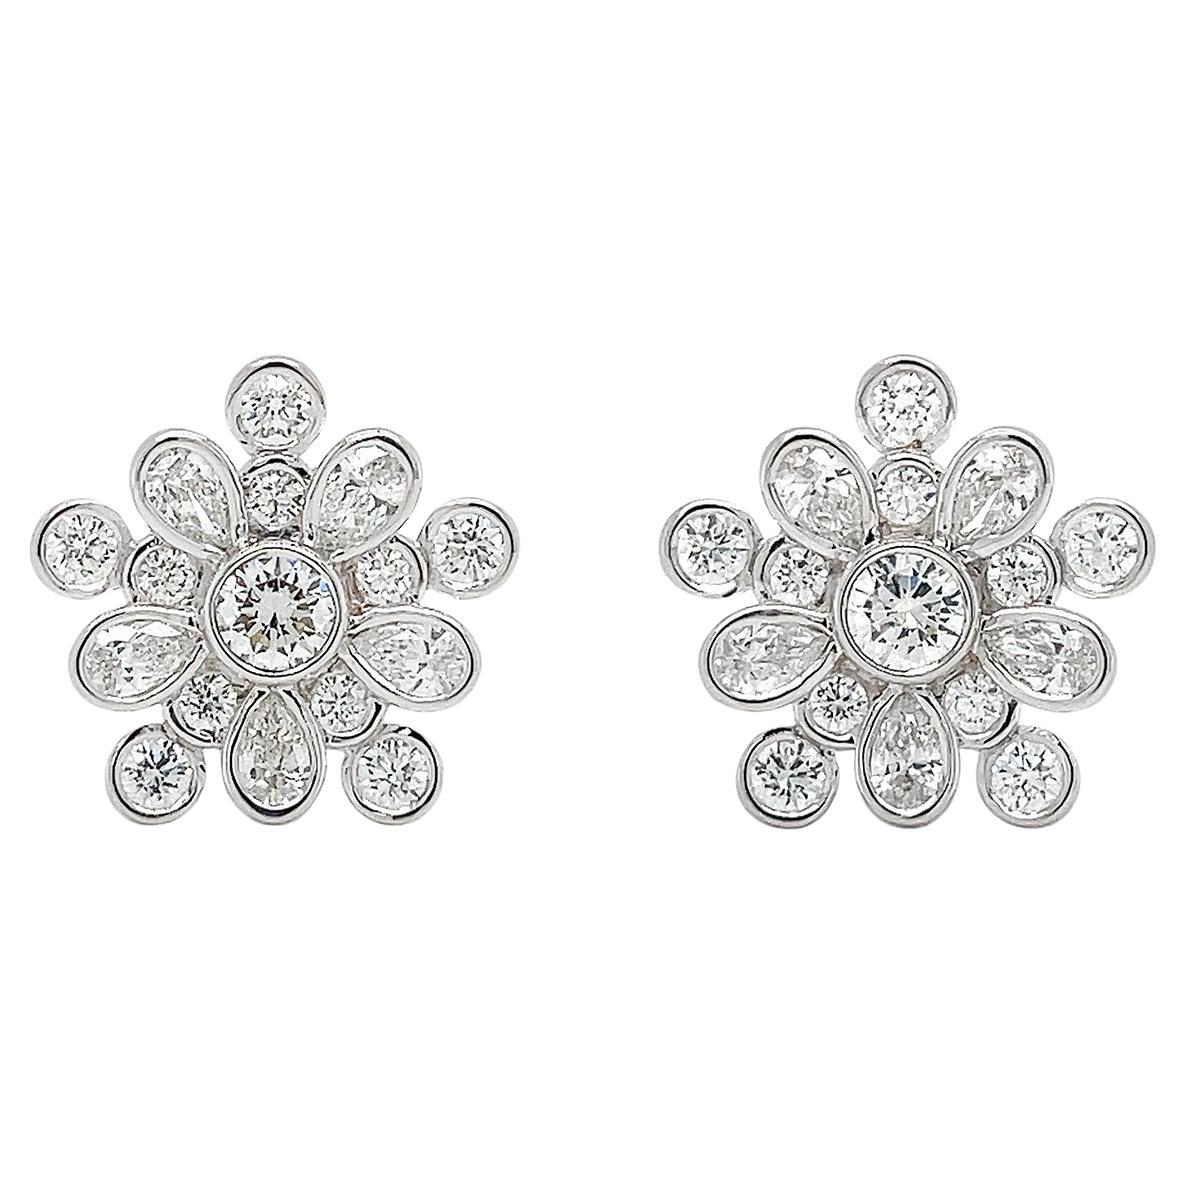 18K White Gold Pear and Round Diamond Earrings